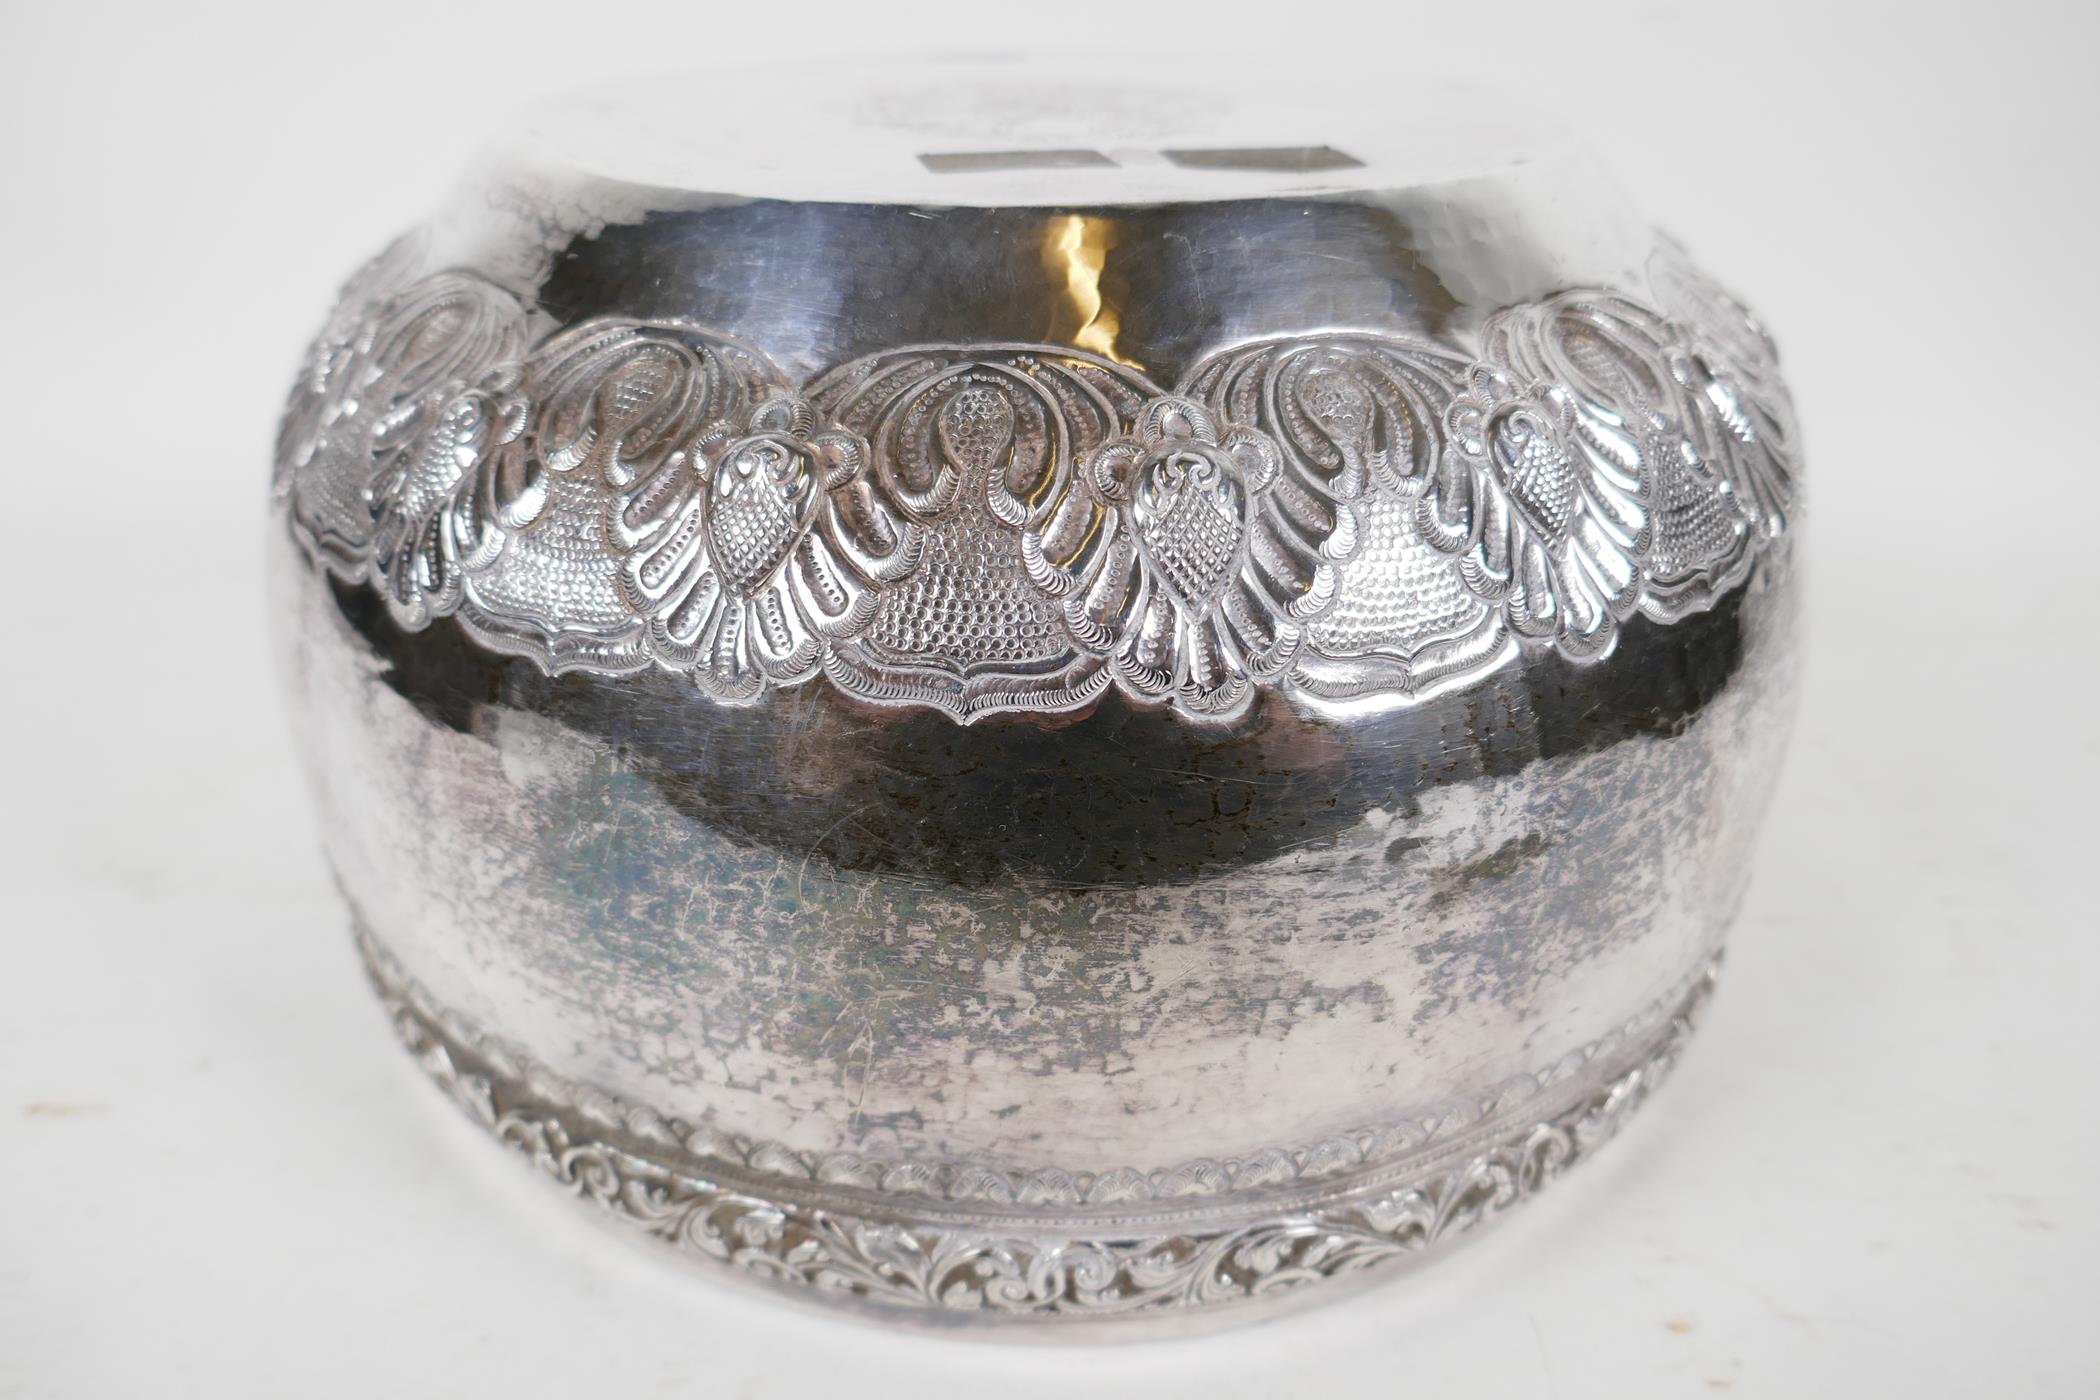 An antique Indian silver bowl, hammered silver with embossed scrolling decoration, a bas relief - Image 5 of 8